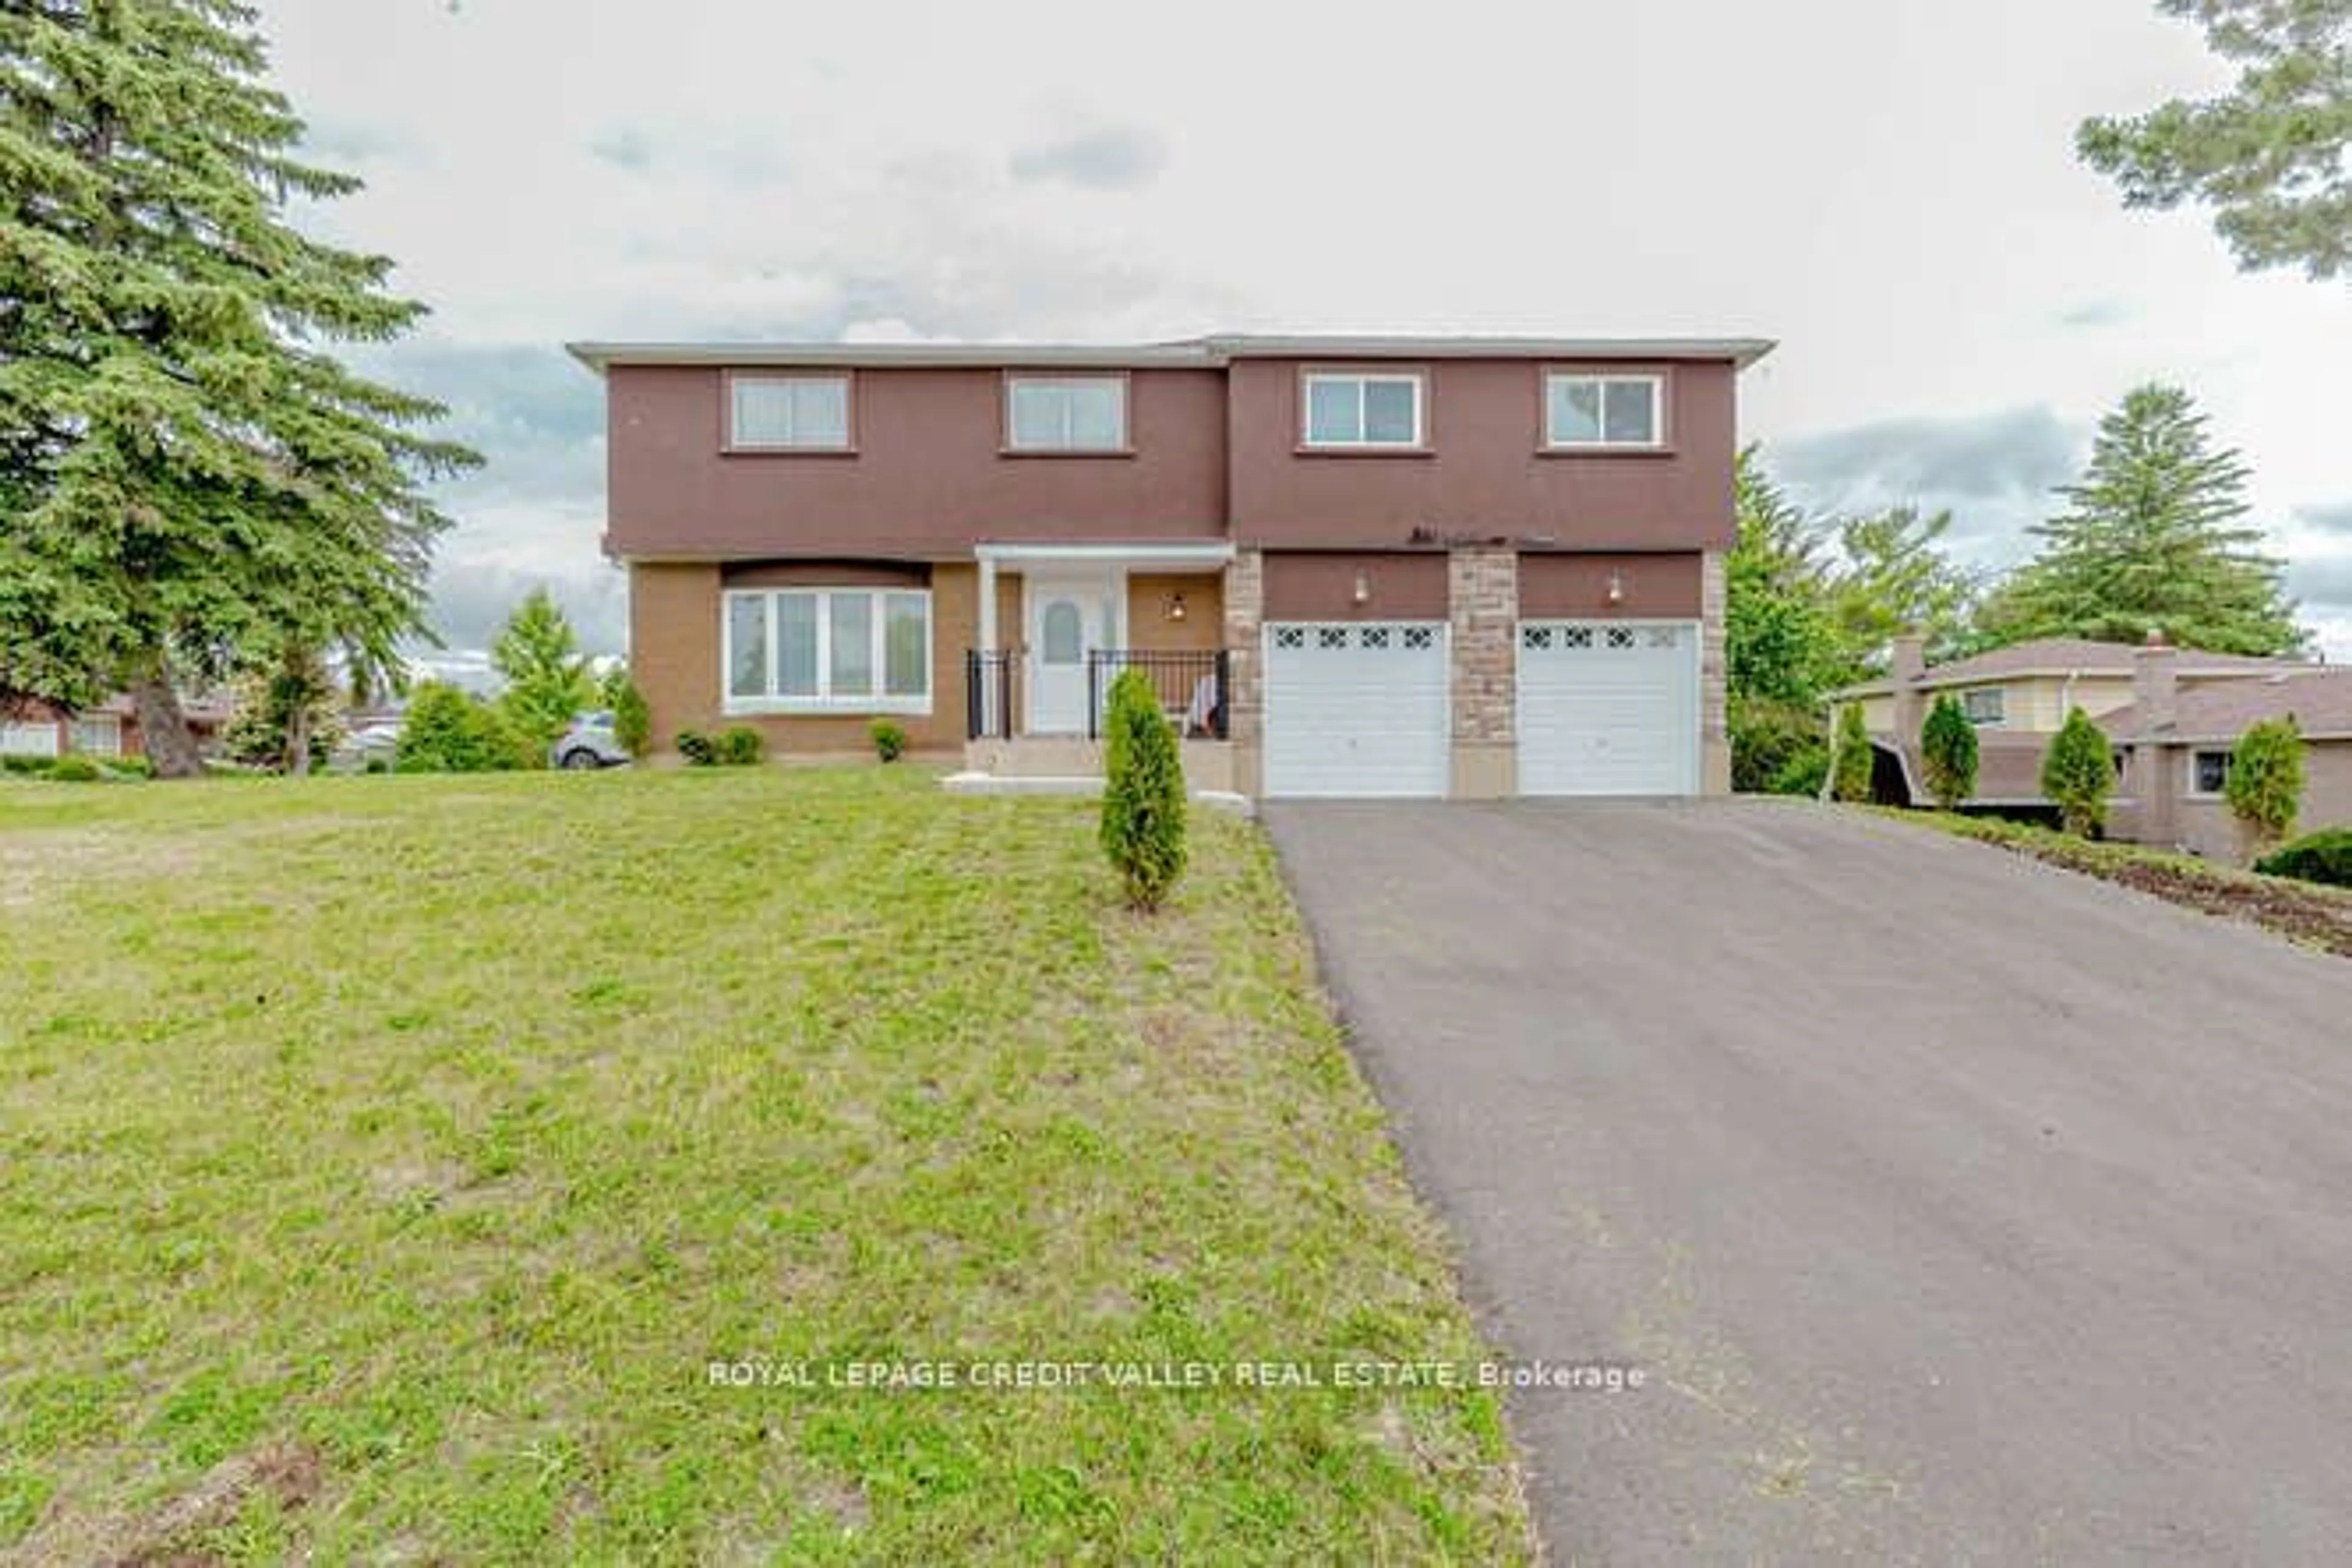 Frontside or backside of a home for 311 Colborne St, Bradford West Gwillimbury Ontario L3Z 1C7